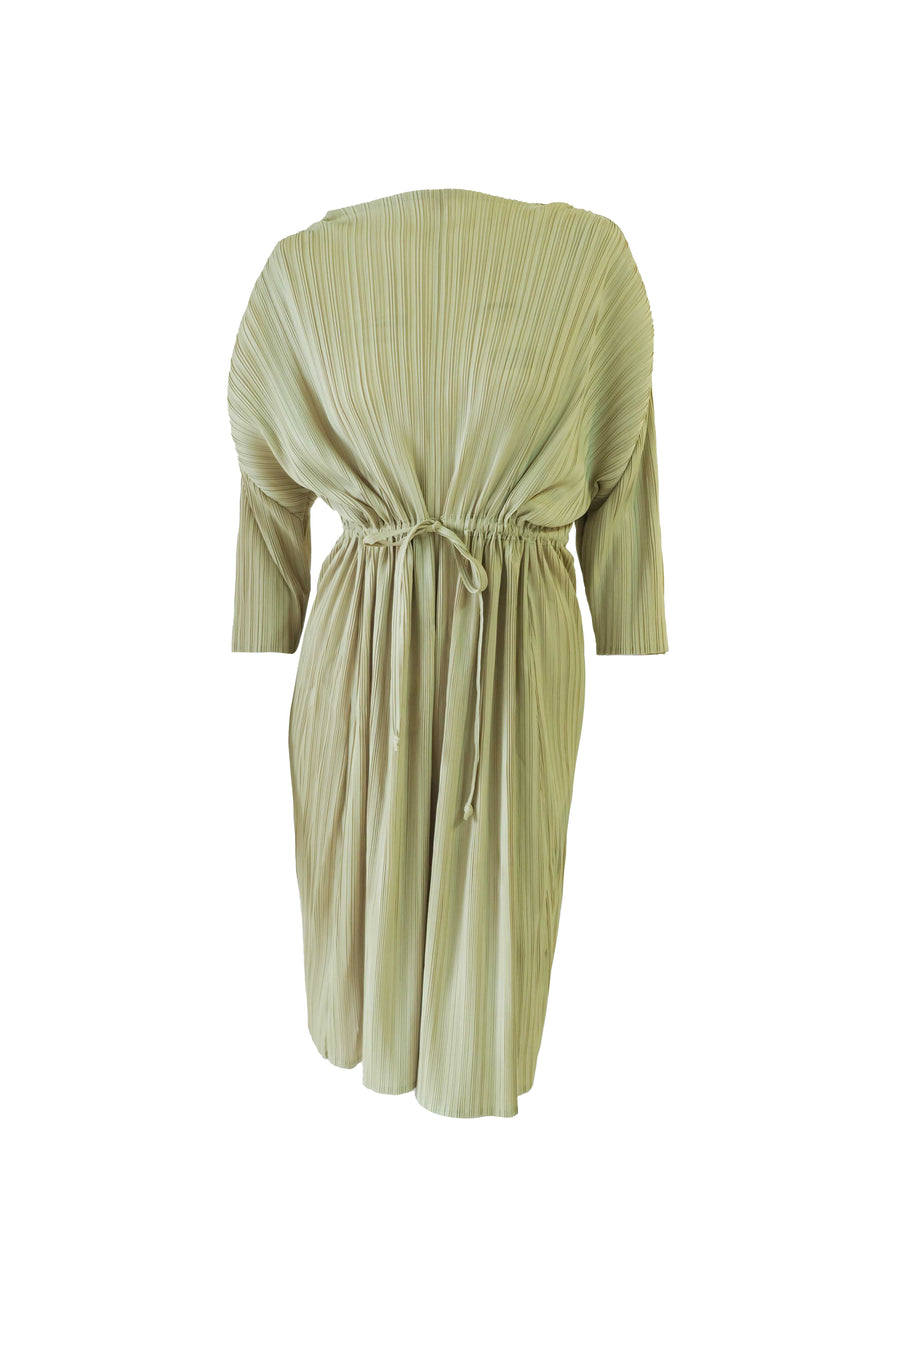 Pleated Dress 009 - Army Green